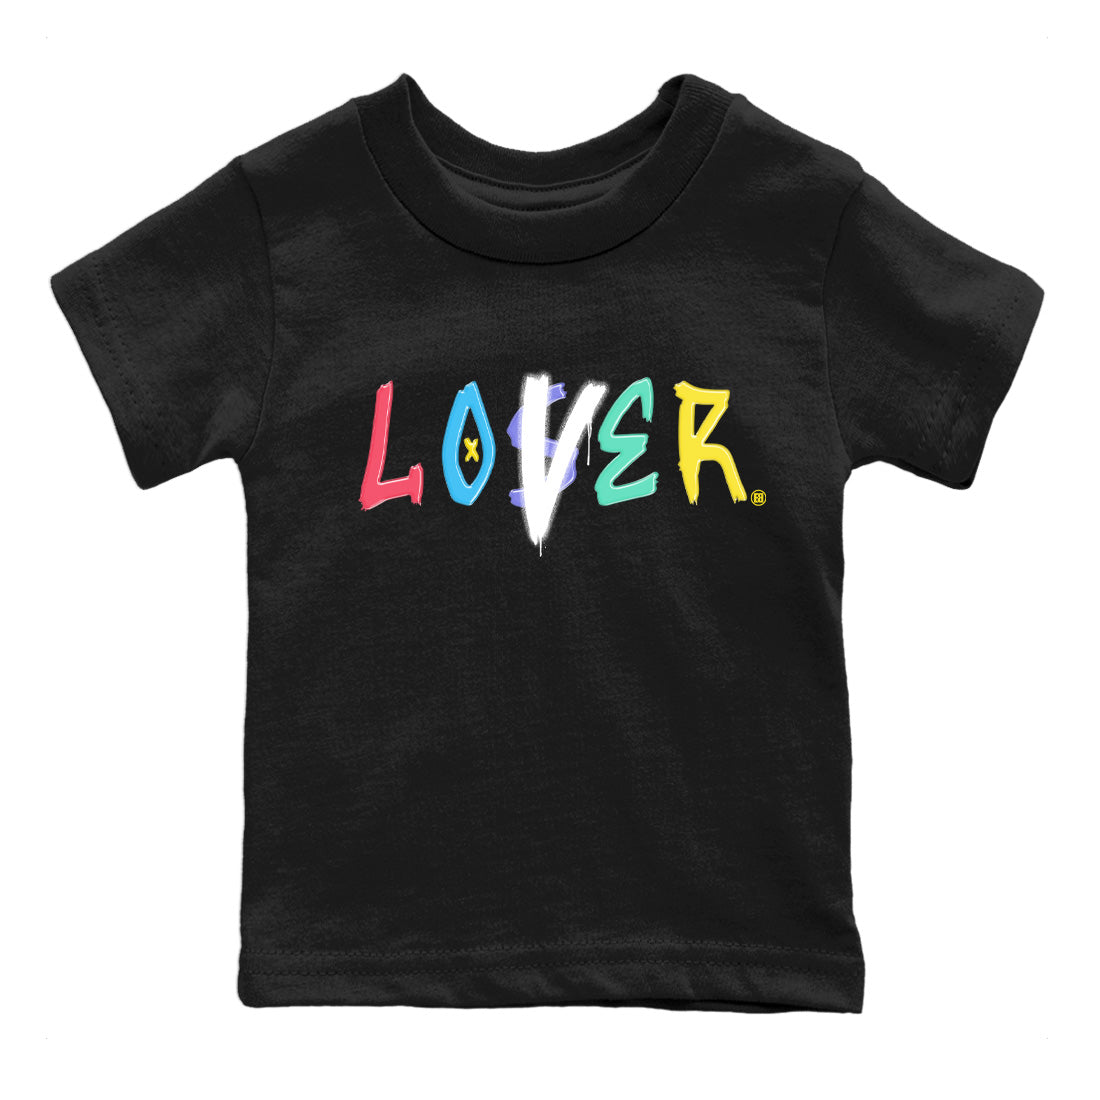 Dunk Easter Candy Sneaker Match Tees Loser Lover Streetwear Sneaker Shirt Holiday Easter T-Shirt Sneaker Release Tees Kids Shirts Black 2